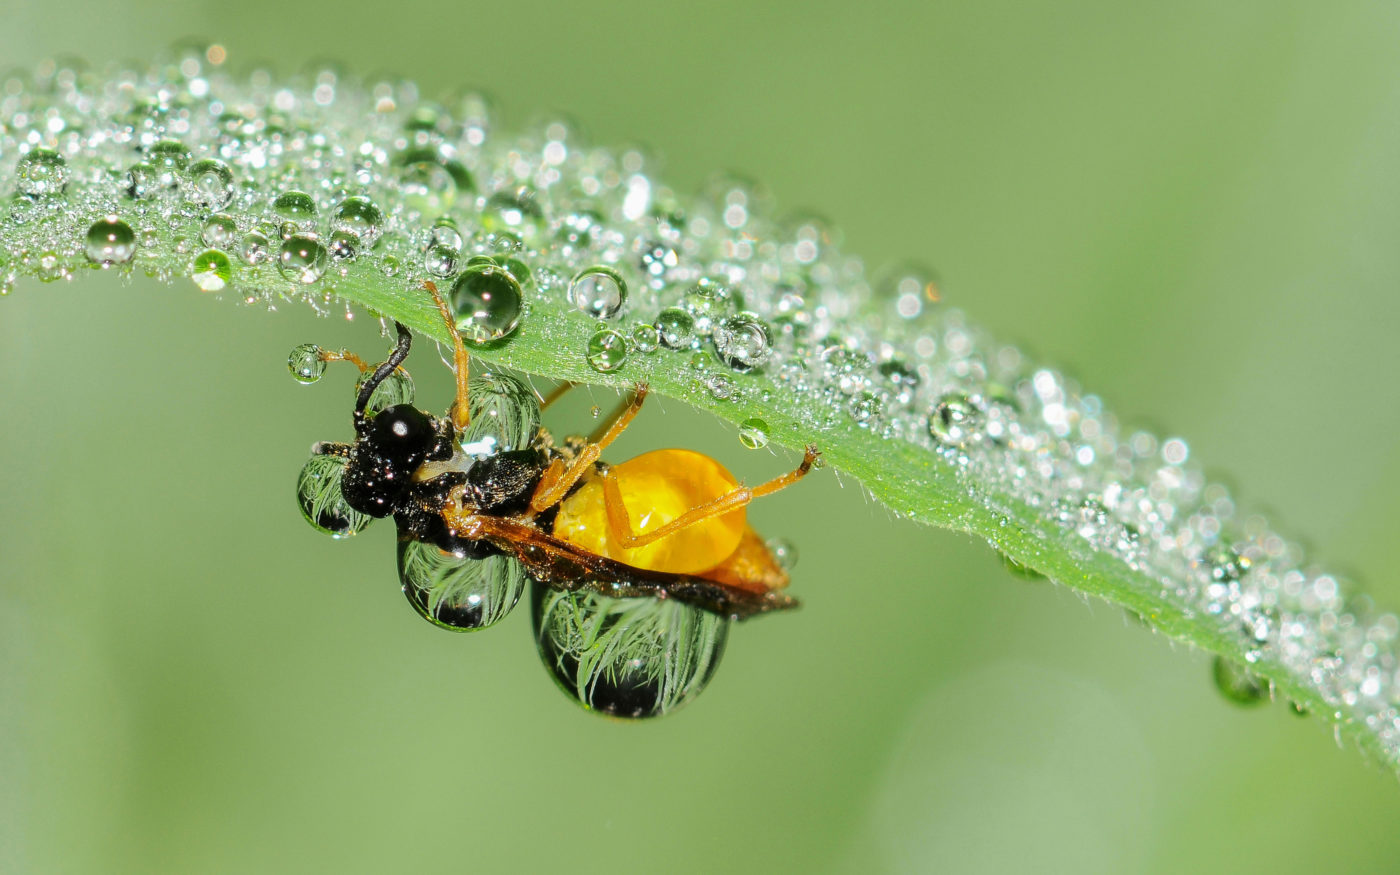 Sawfly upside down on a green leaf, with both the leaf and the sawfly covered in small beads of water